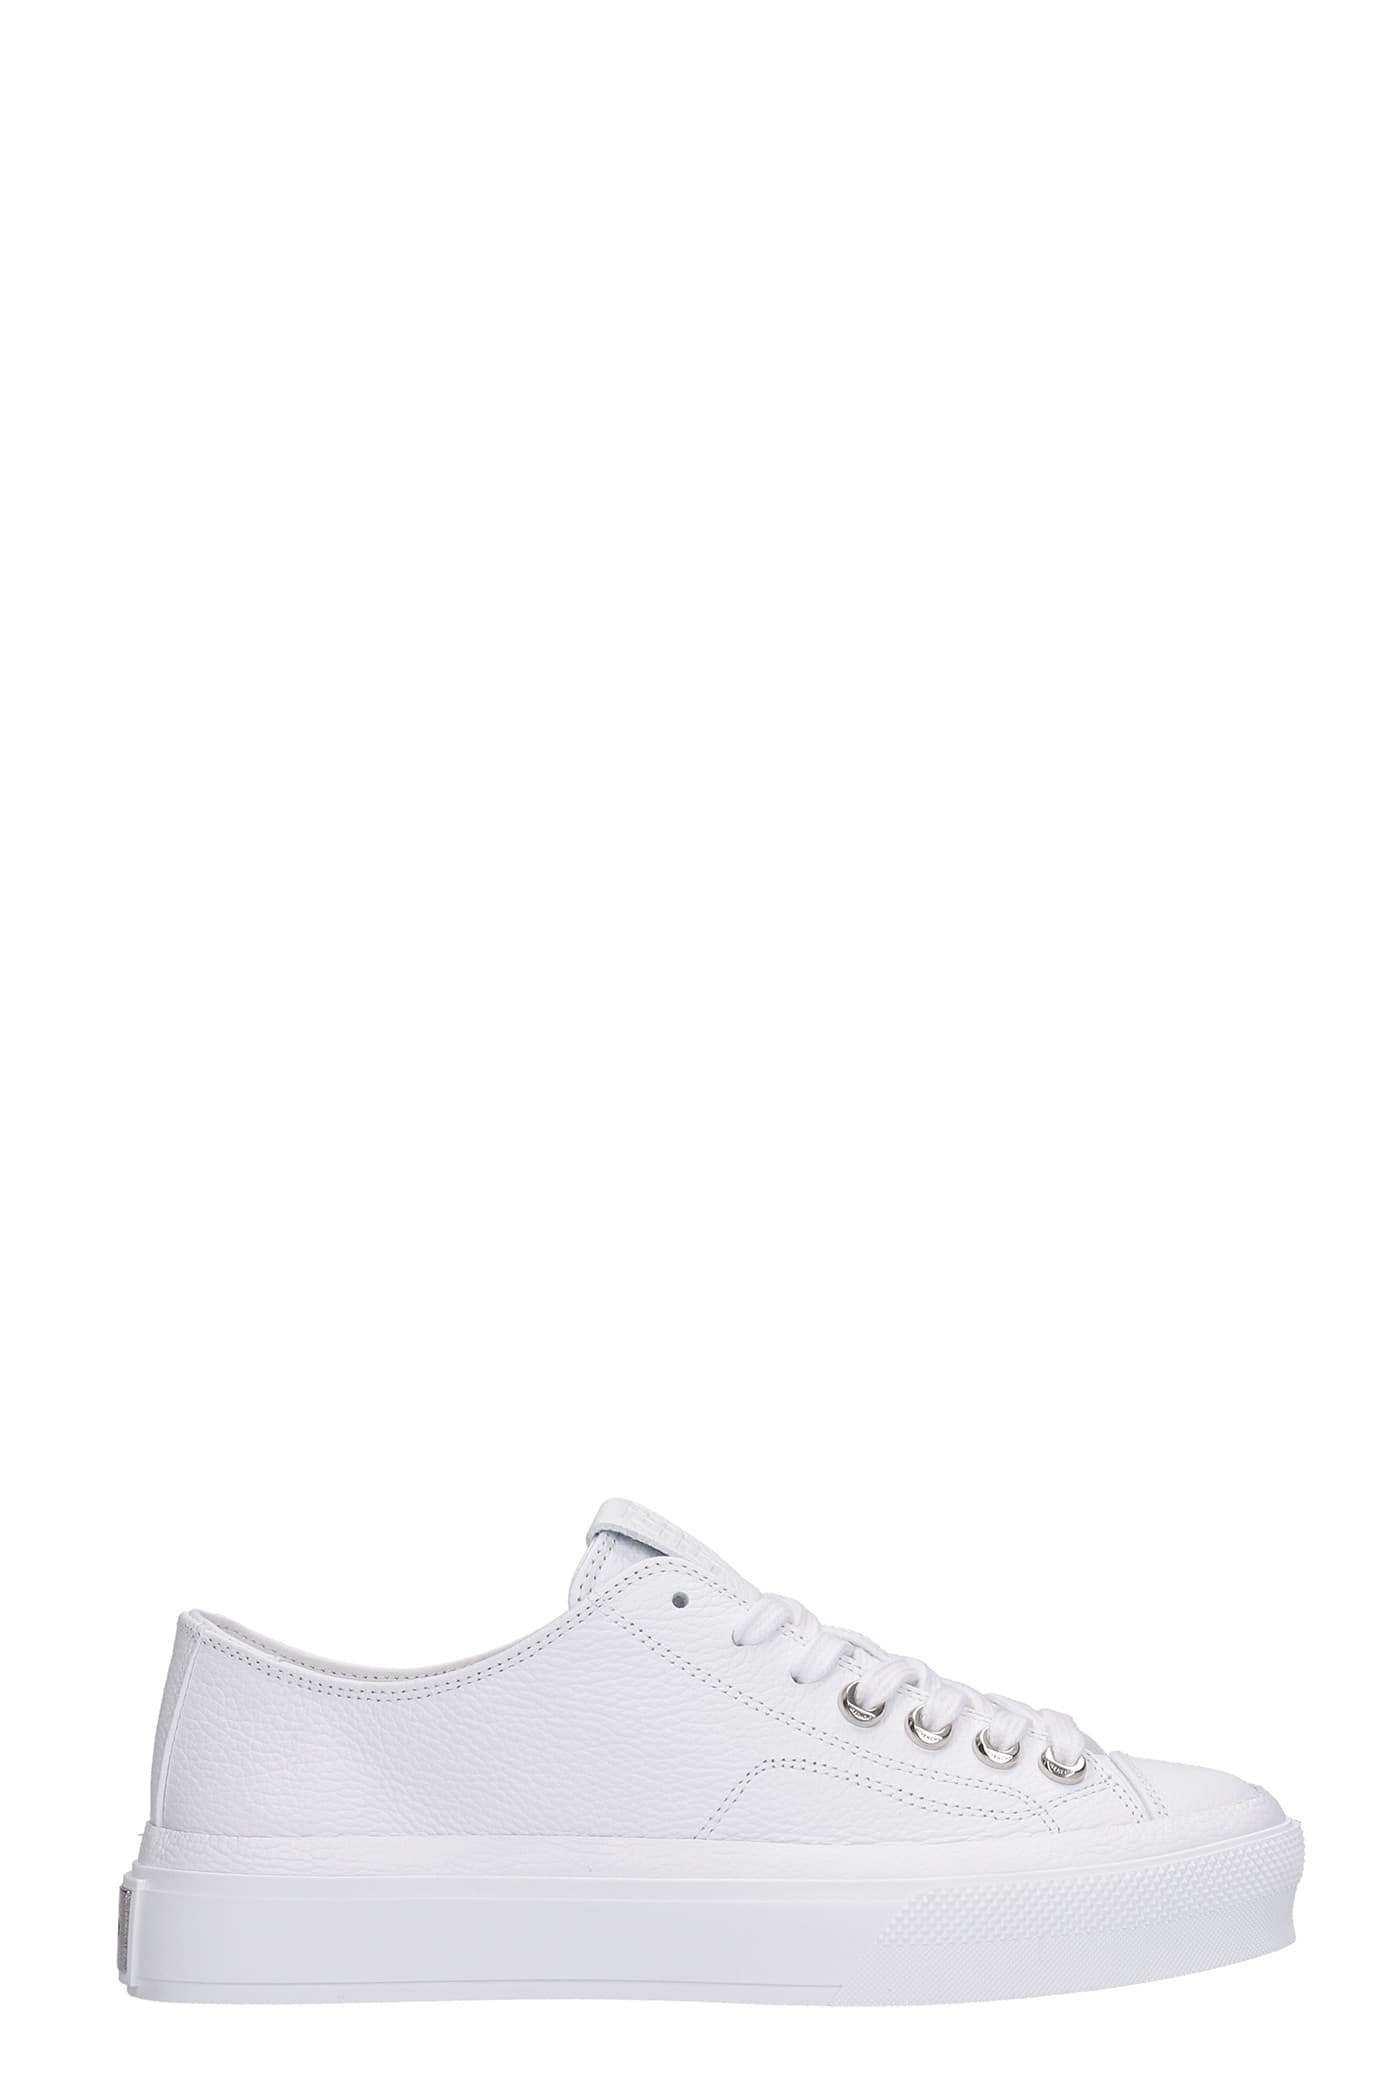 Givenchy City Low Sneakers In White Leather